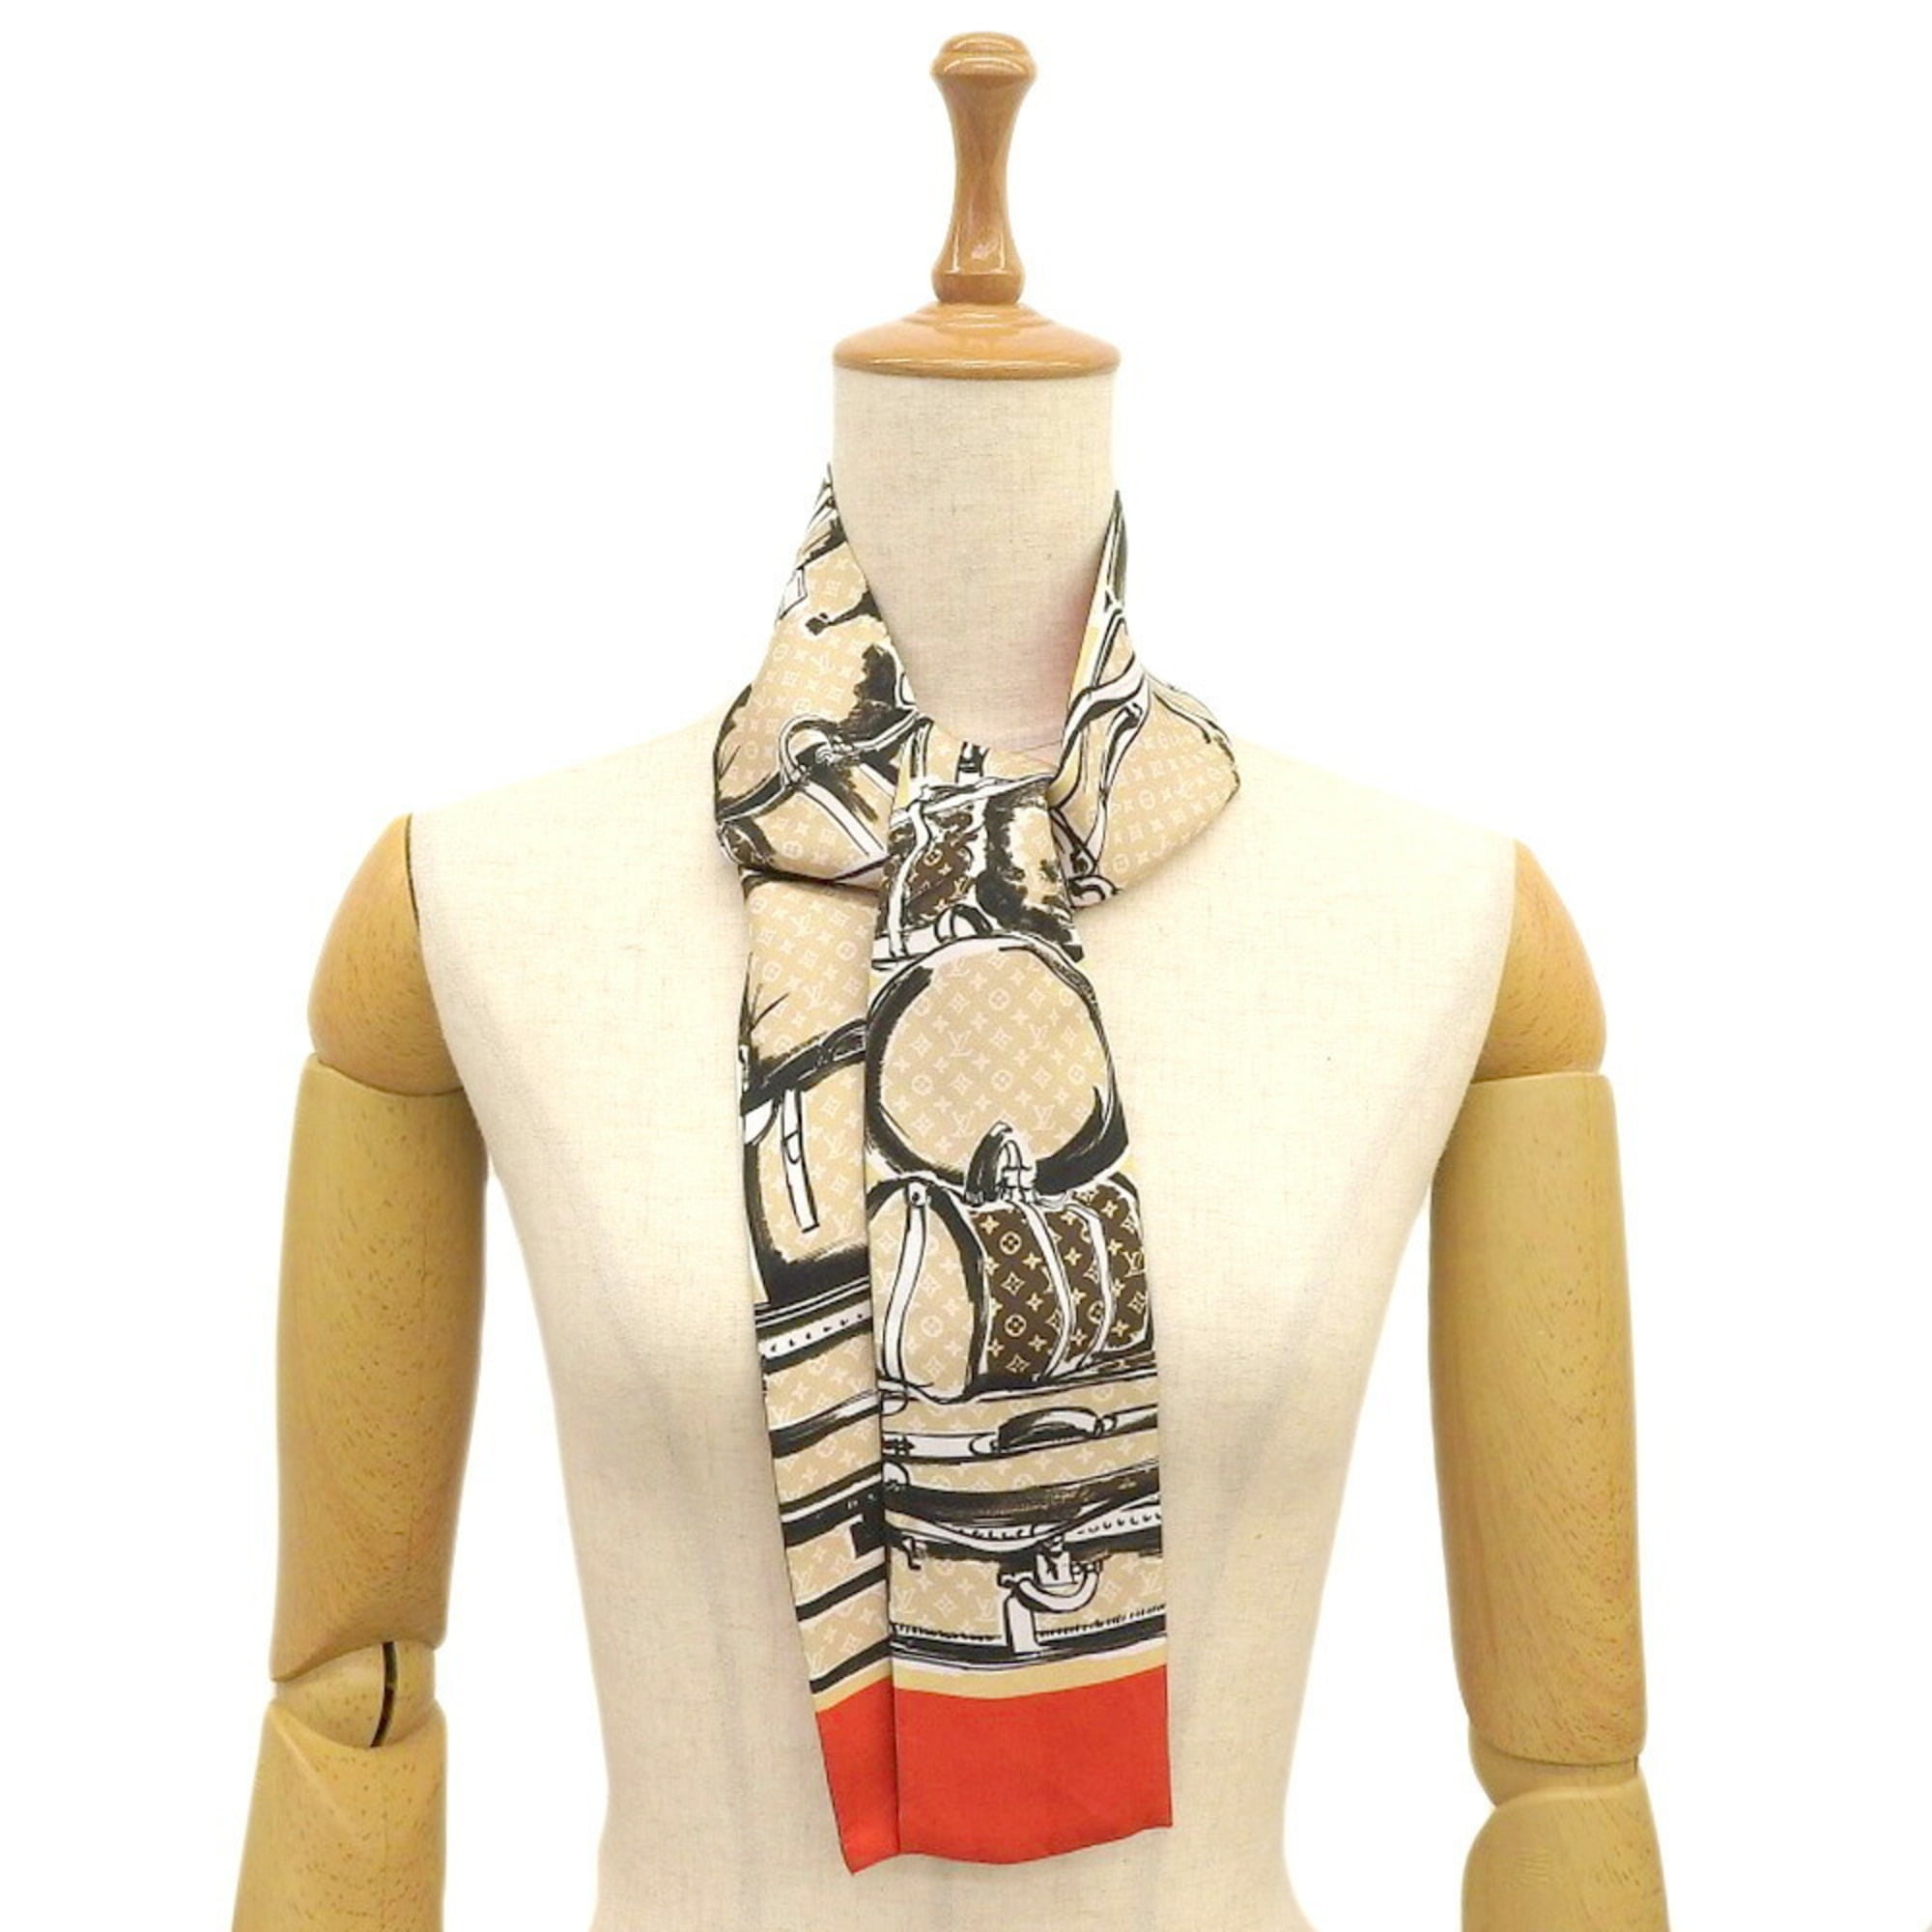 Authenticated Used Louis Vuitton Bandeau Ribbon Scarf Ivory x Blue